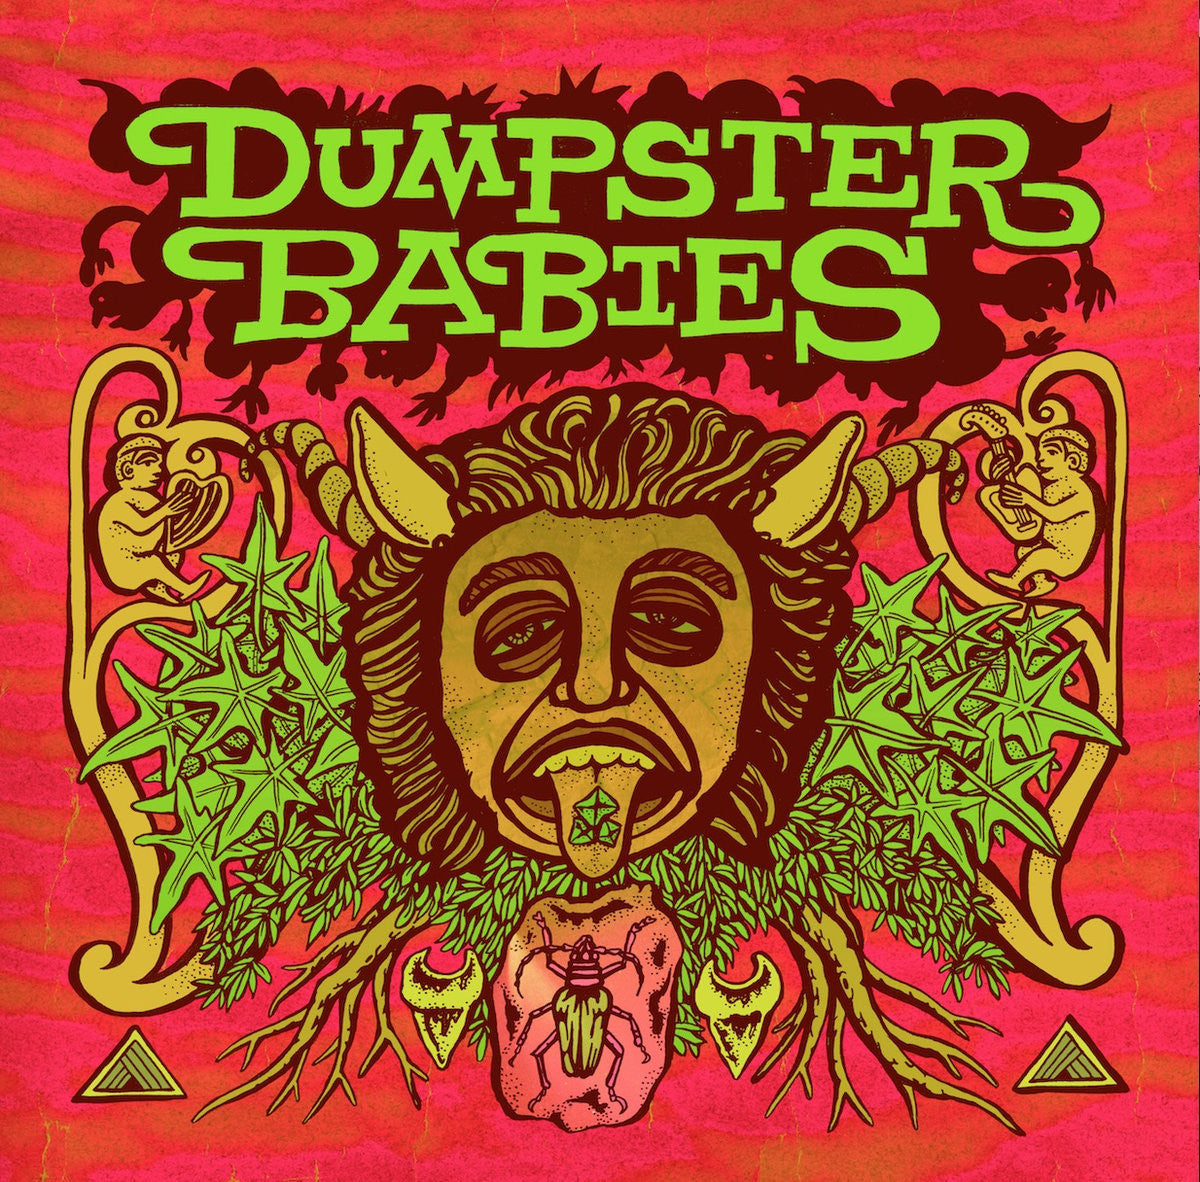 Dumpster Babies - Lost and Found - New Vinyl Record 2016 Tall Pat Records - Chicago IL Punk / Garage Rock